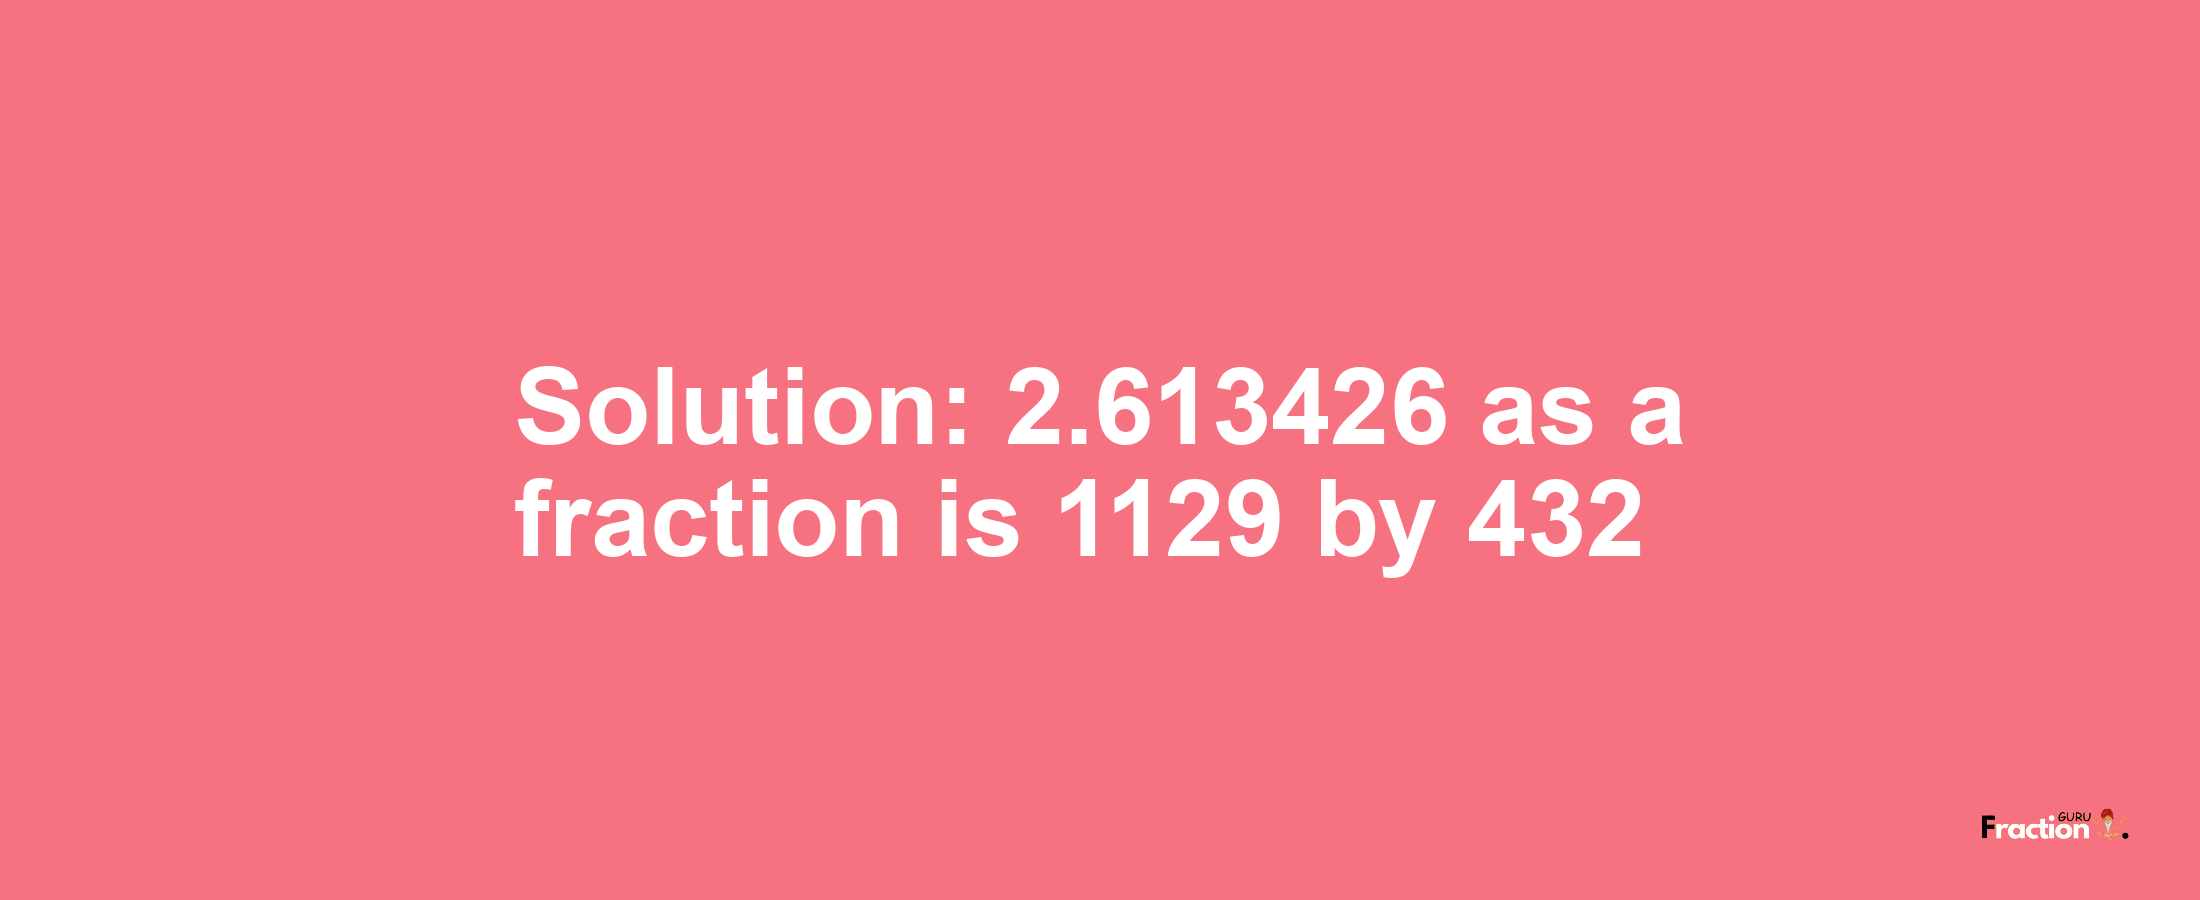 Solution:2.613426 as a fraction is 1129/432